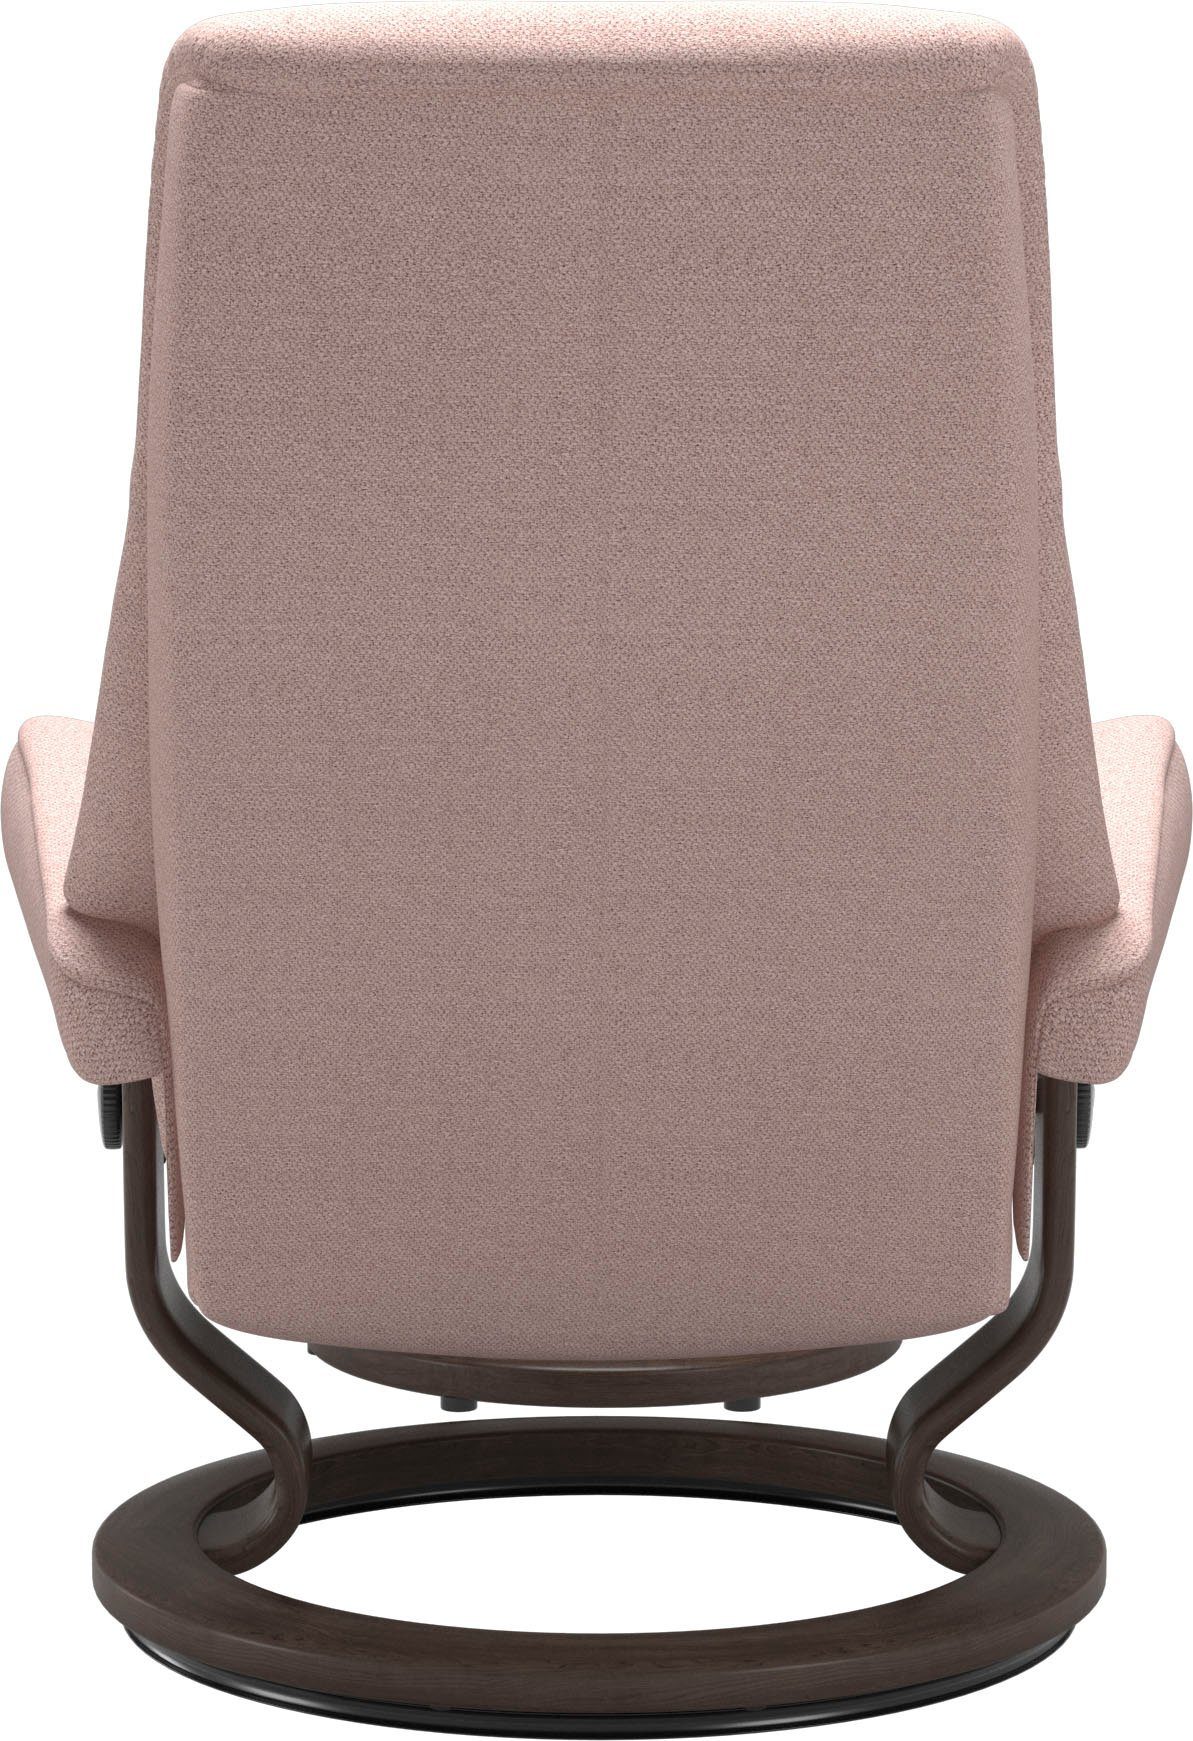 Stressless® Relaxsessel View, mit Base, Größe Classic Wenge M,Gestell